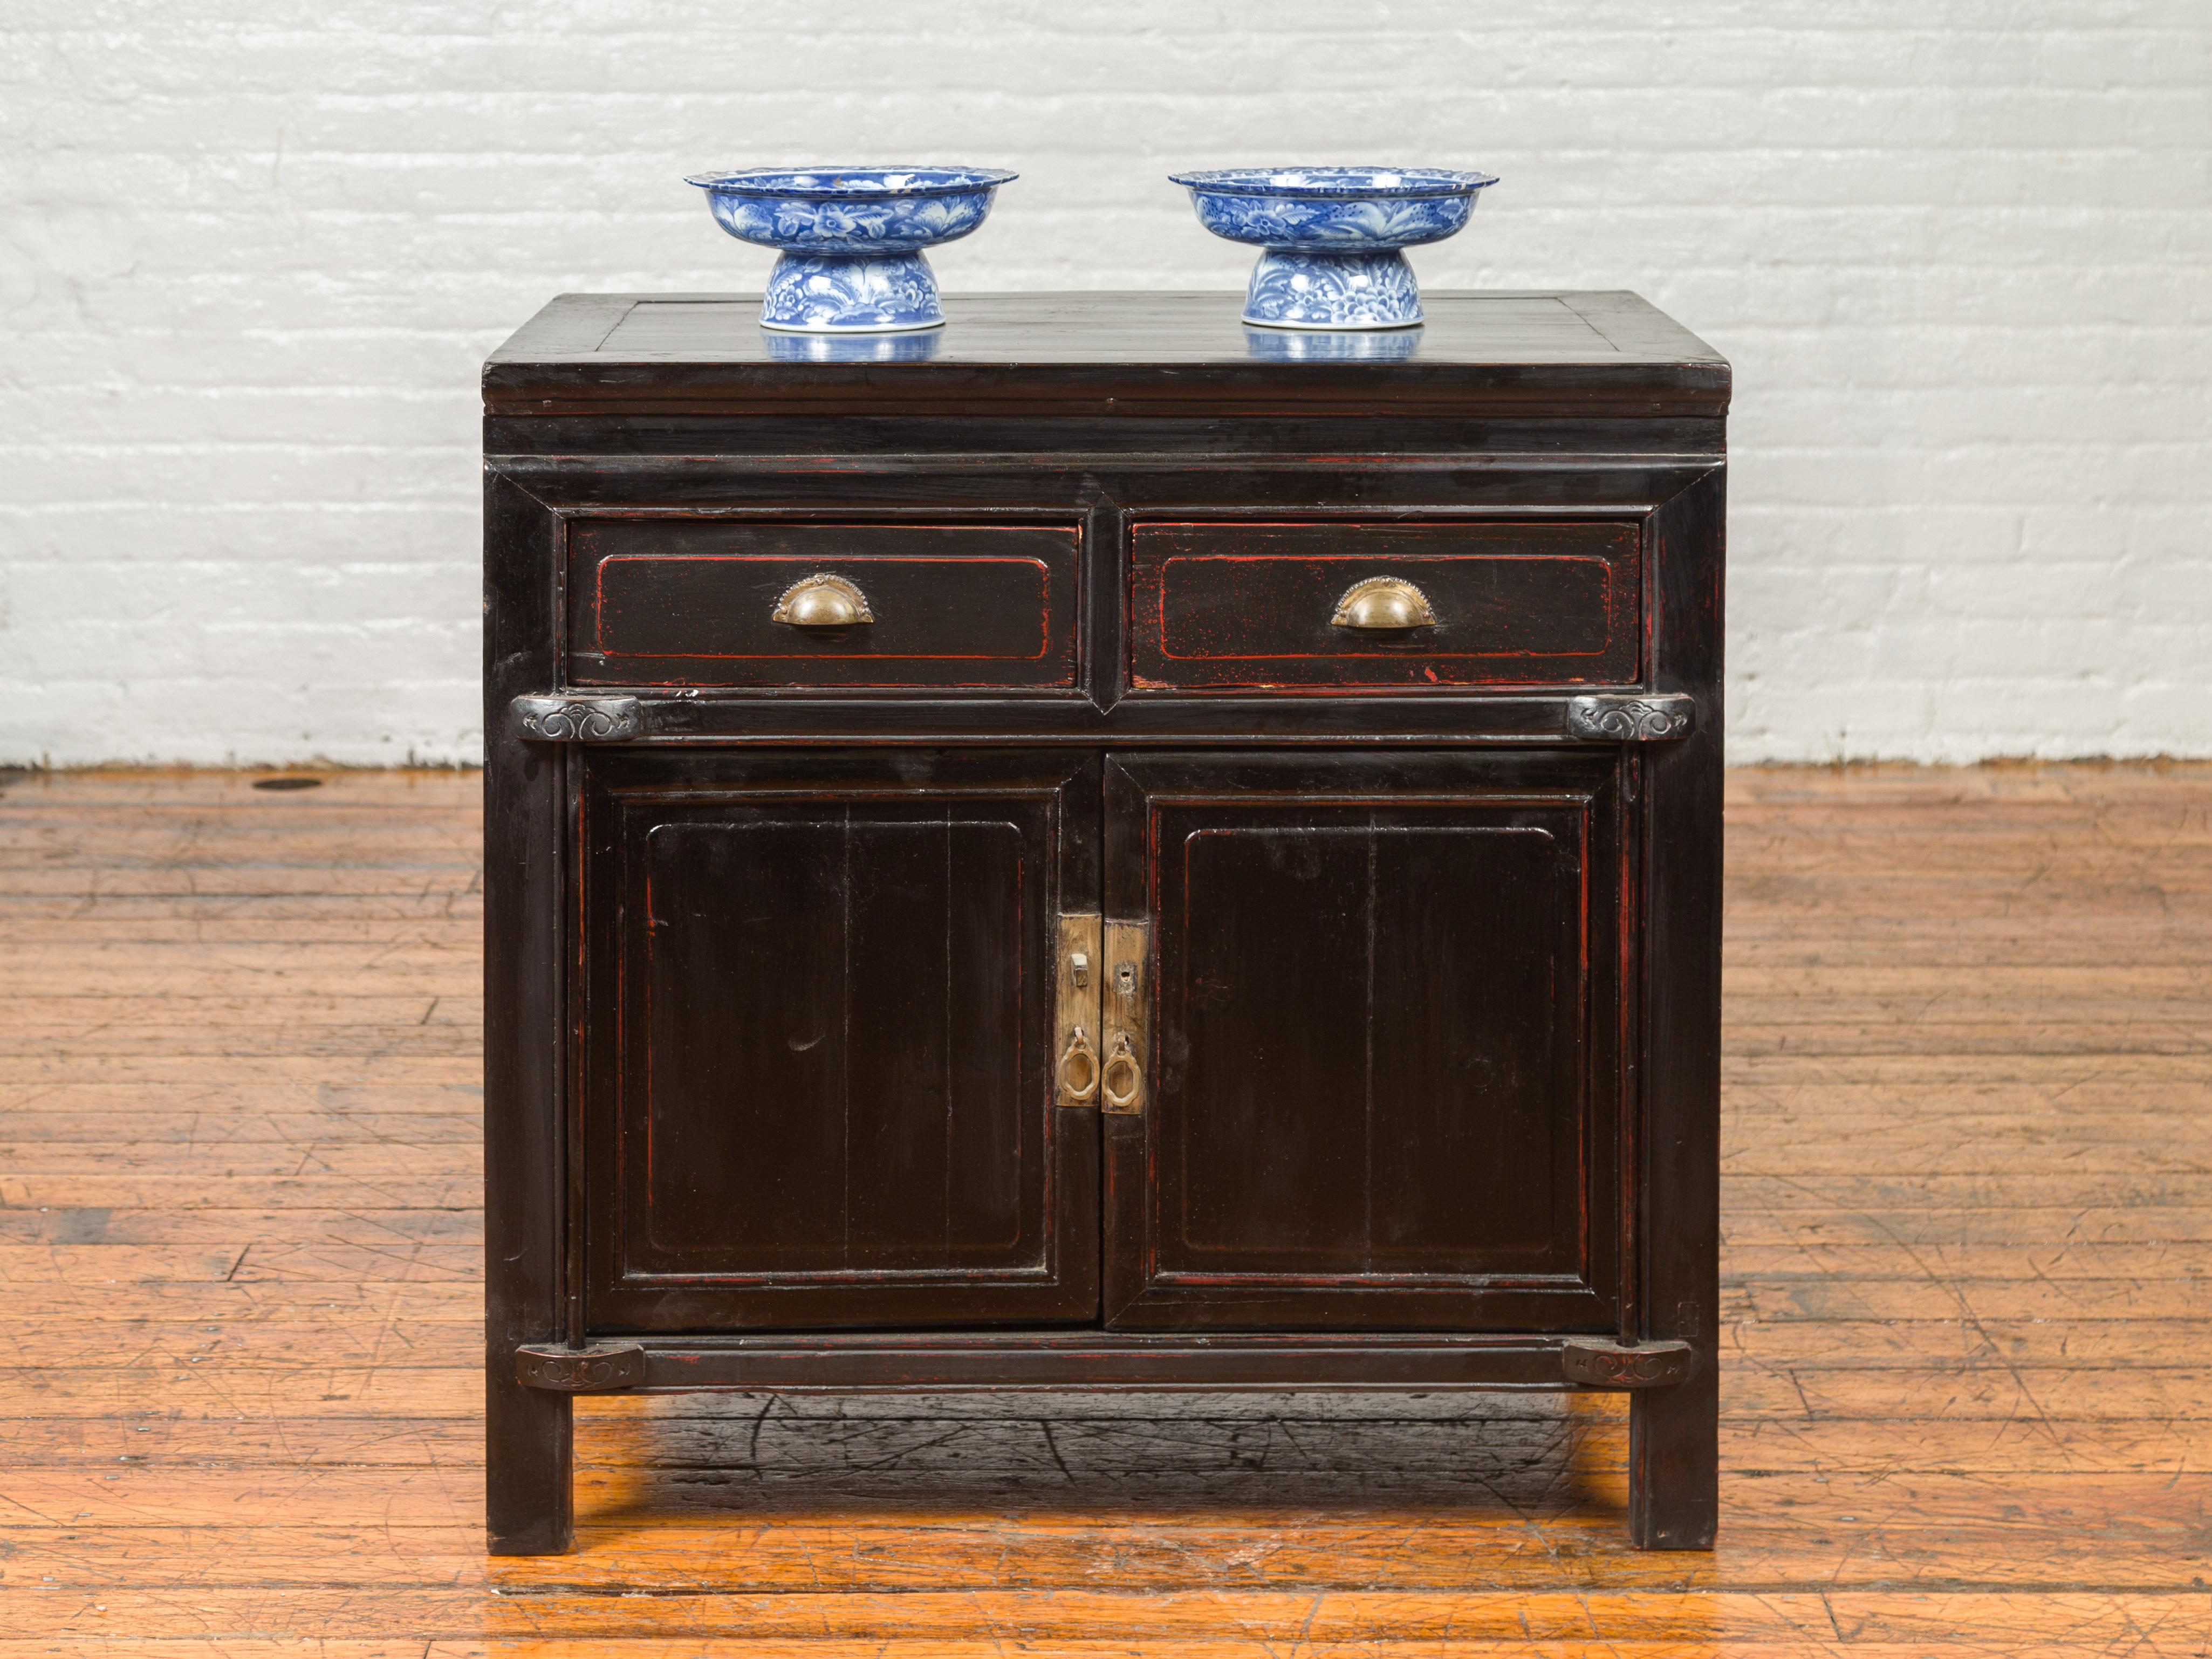 20th Century Vintage Chinese Black Lacquered Buffet with Red Highlights, Drawers and Doors